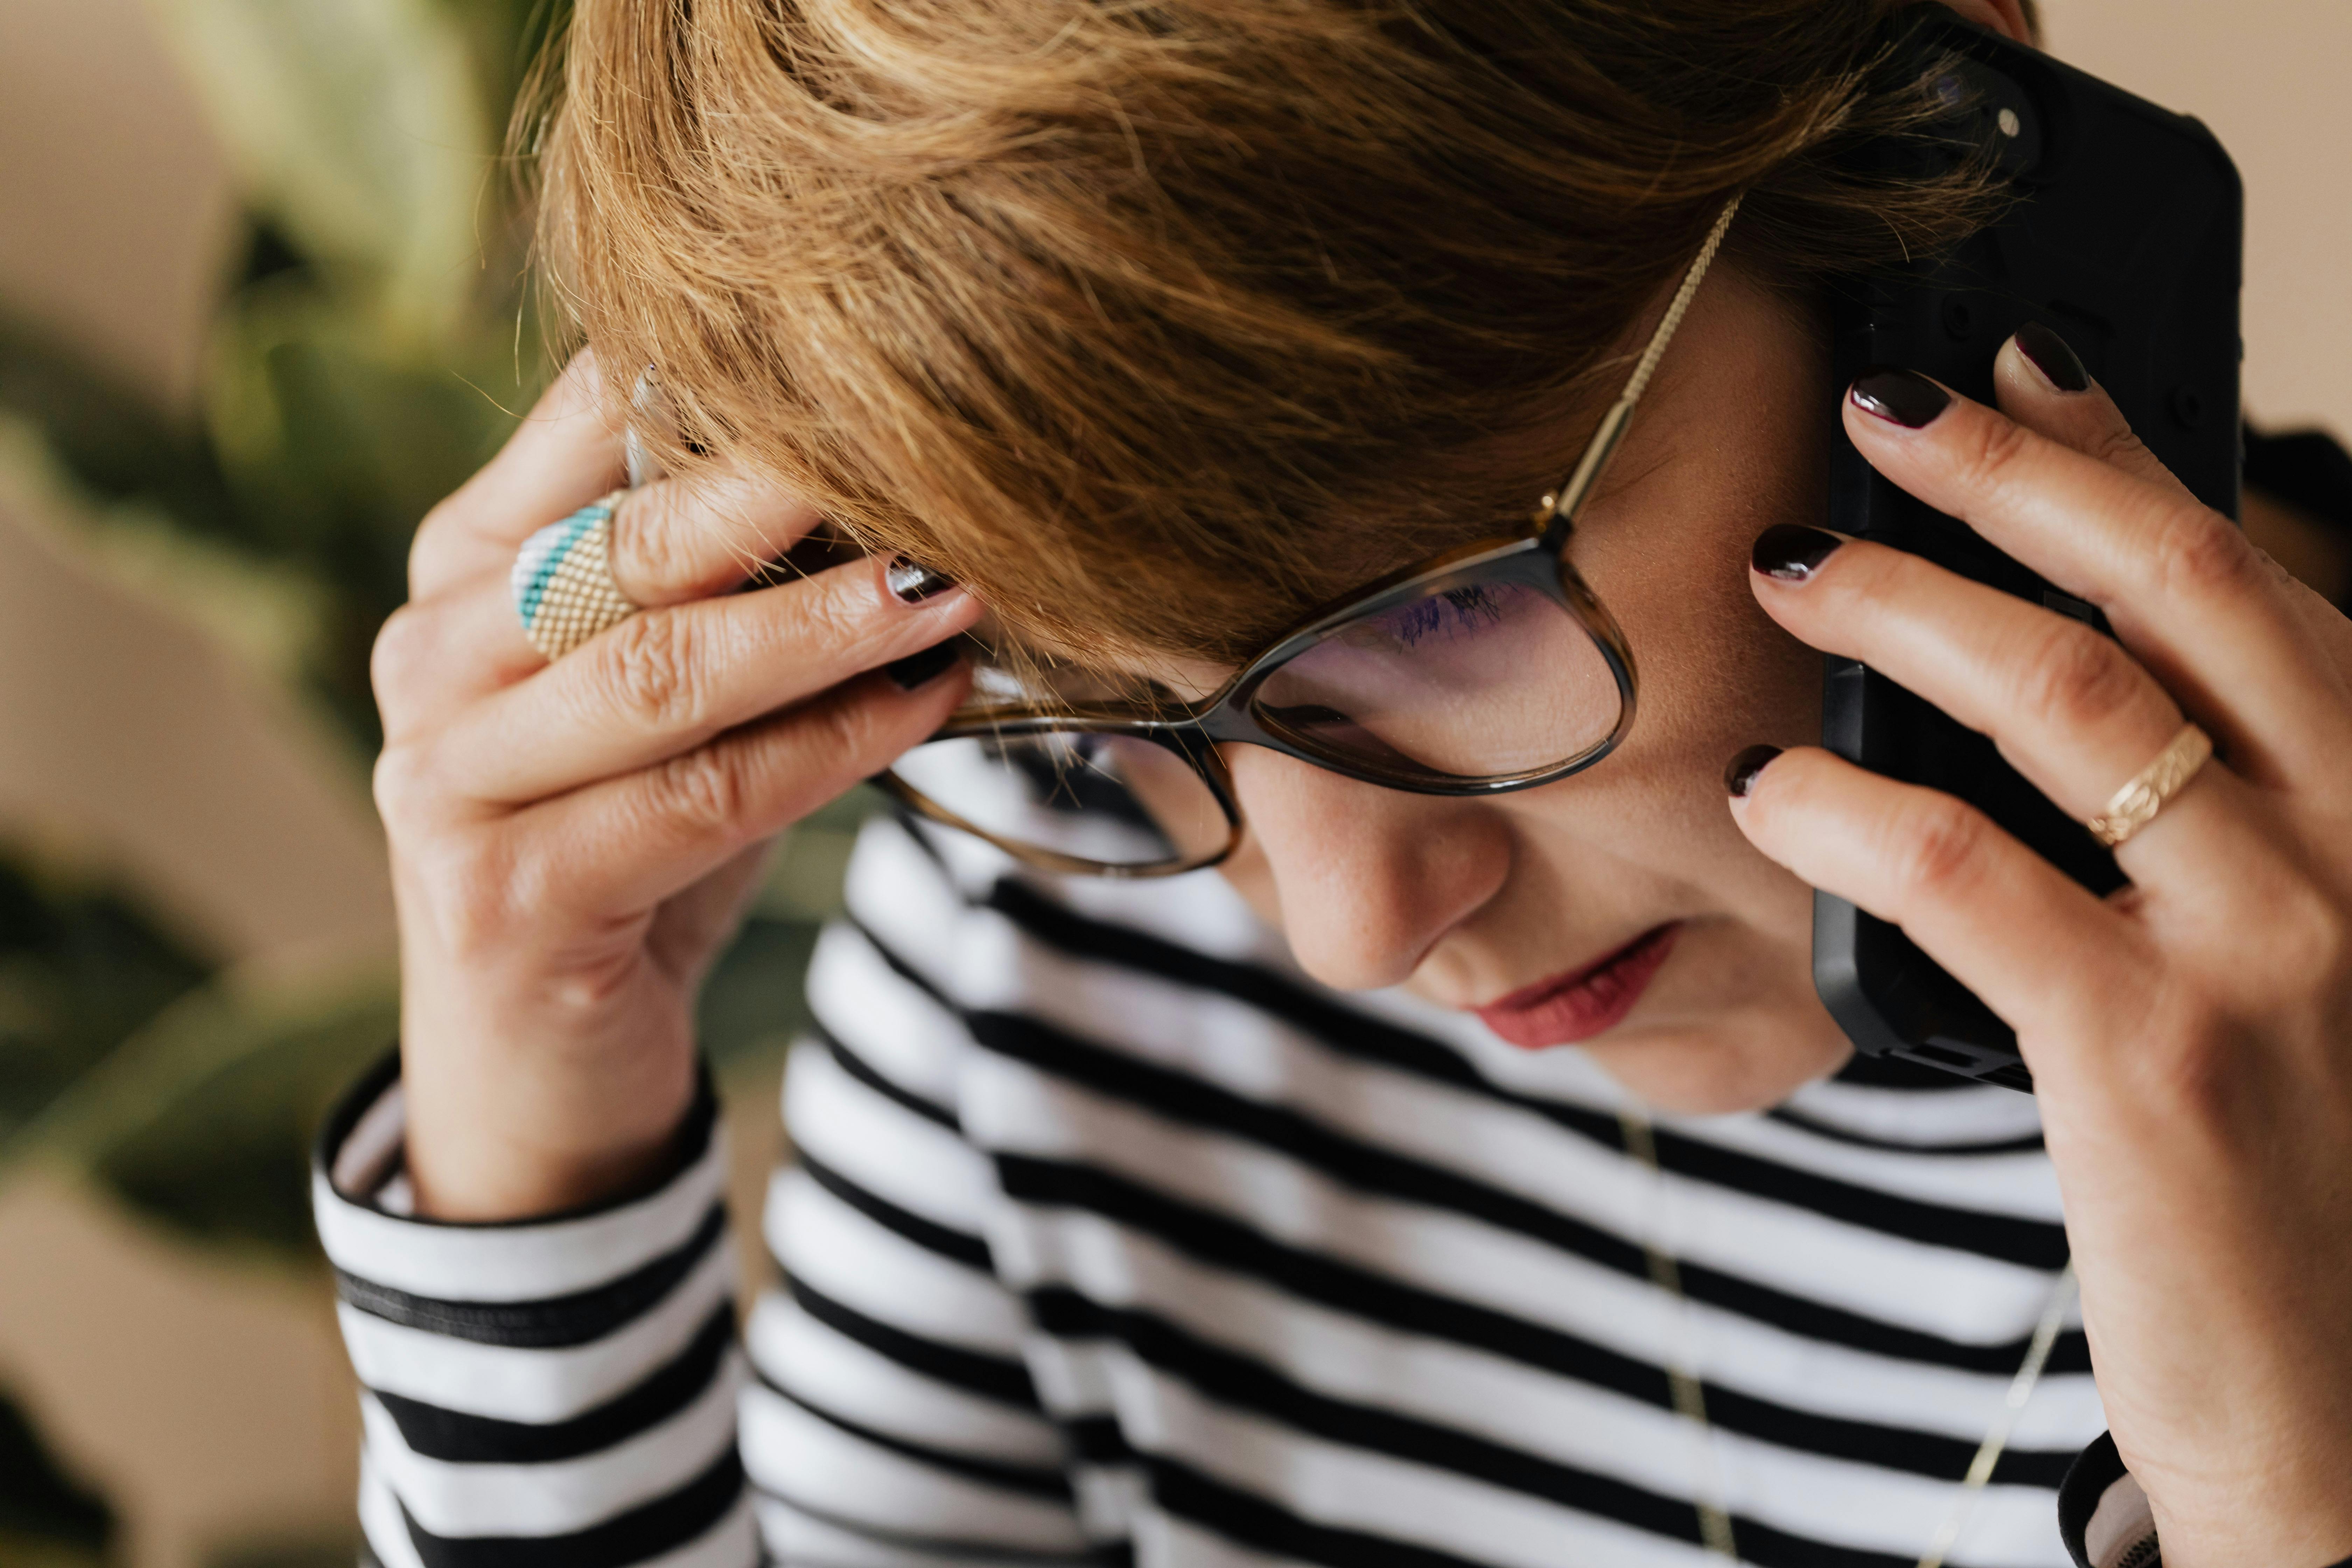 A frustrated woman on a phone call | Source: Pexels